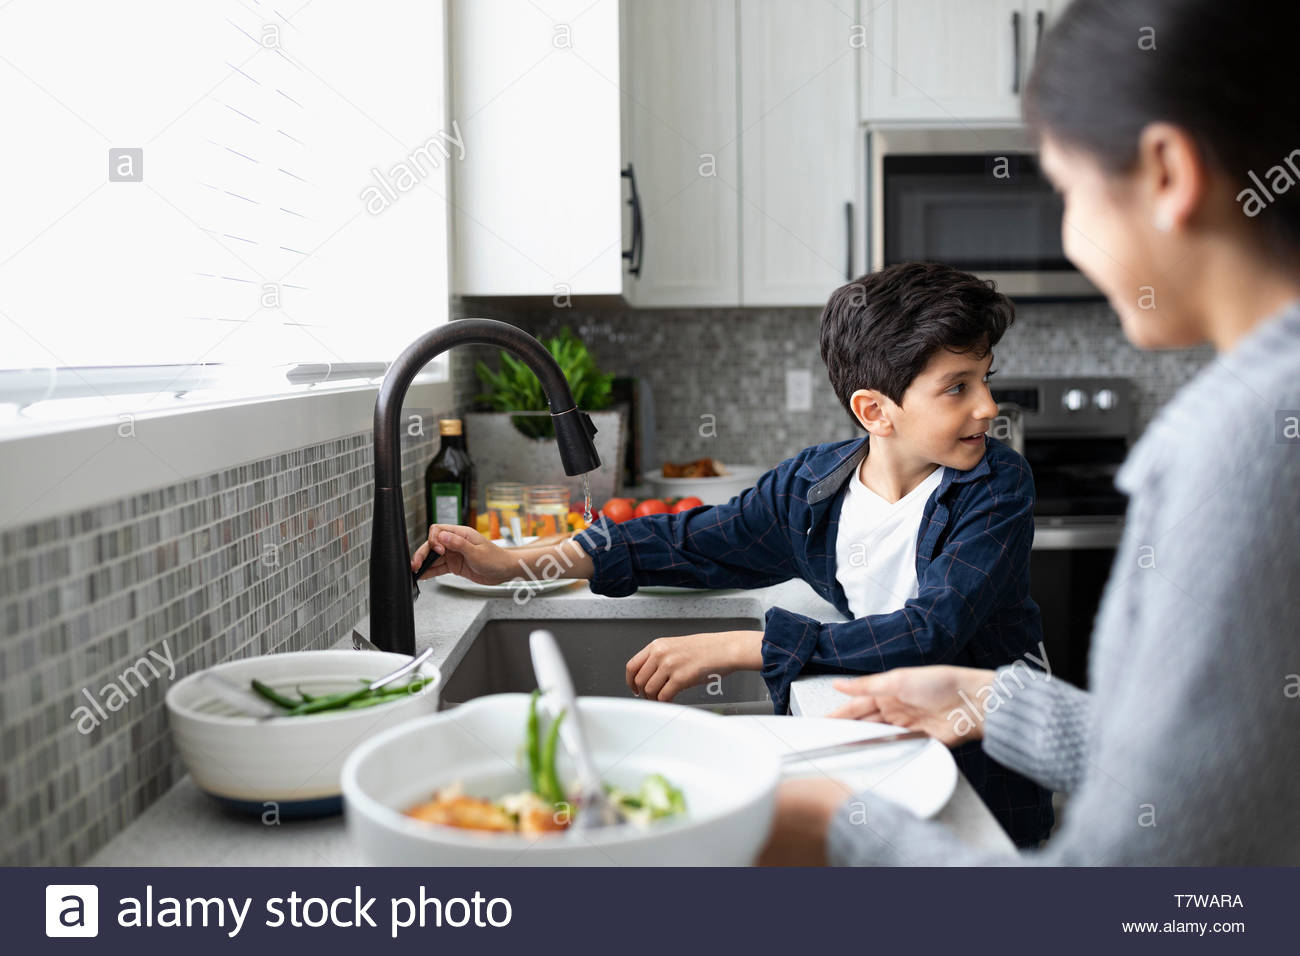 Brother and sister doing dishes at kitchen sink Stock Photo